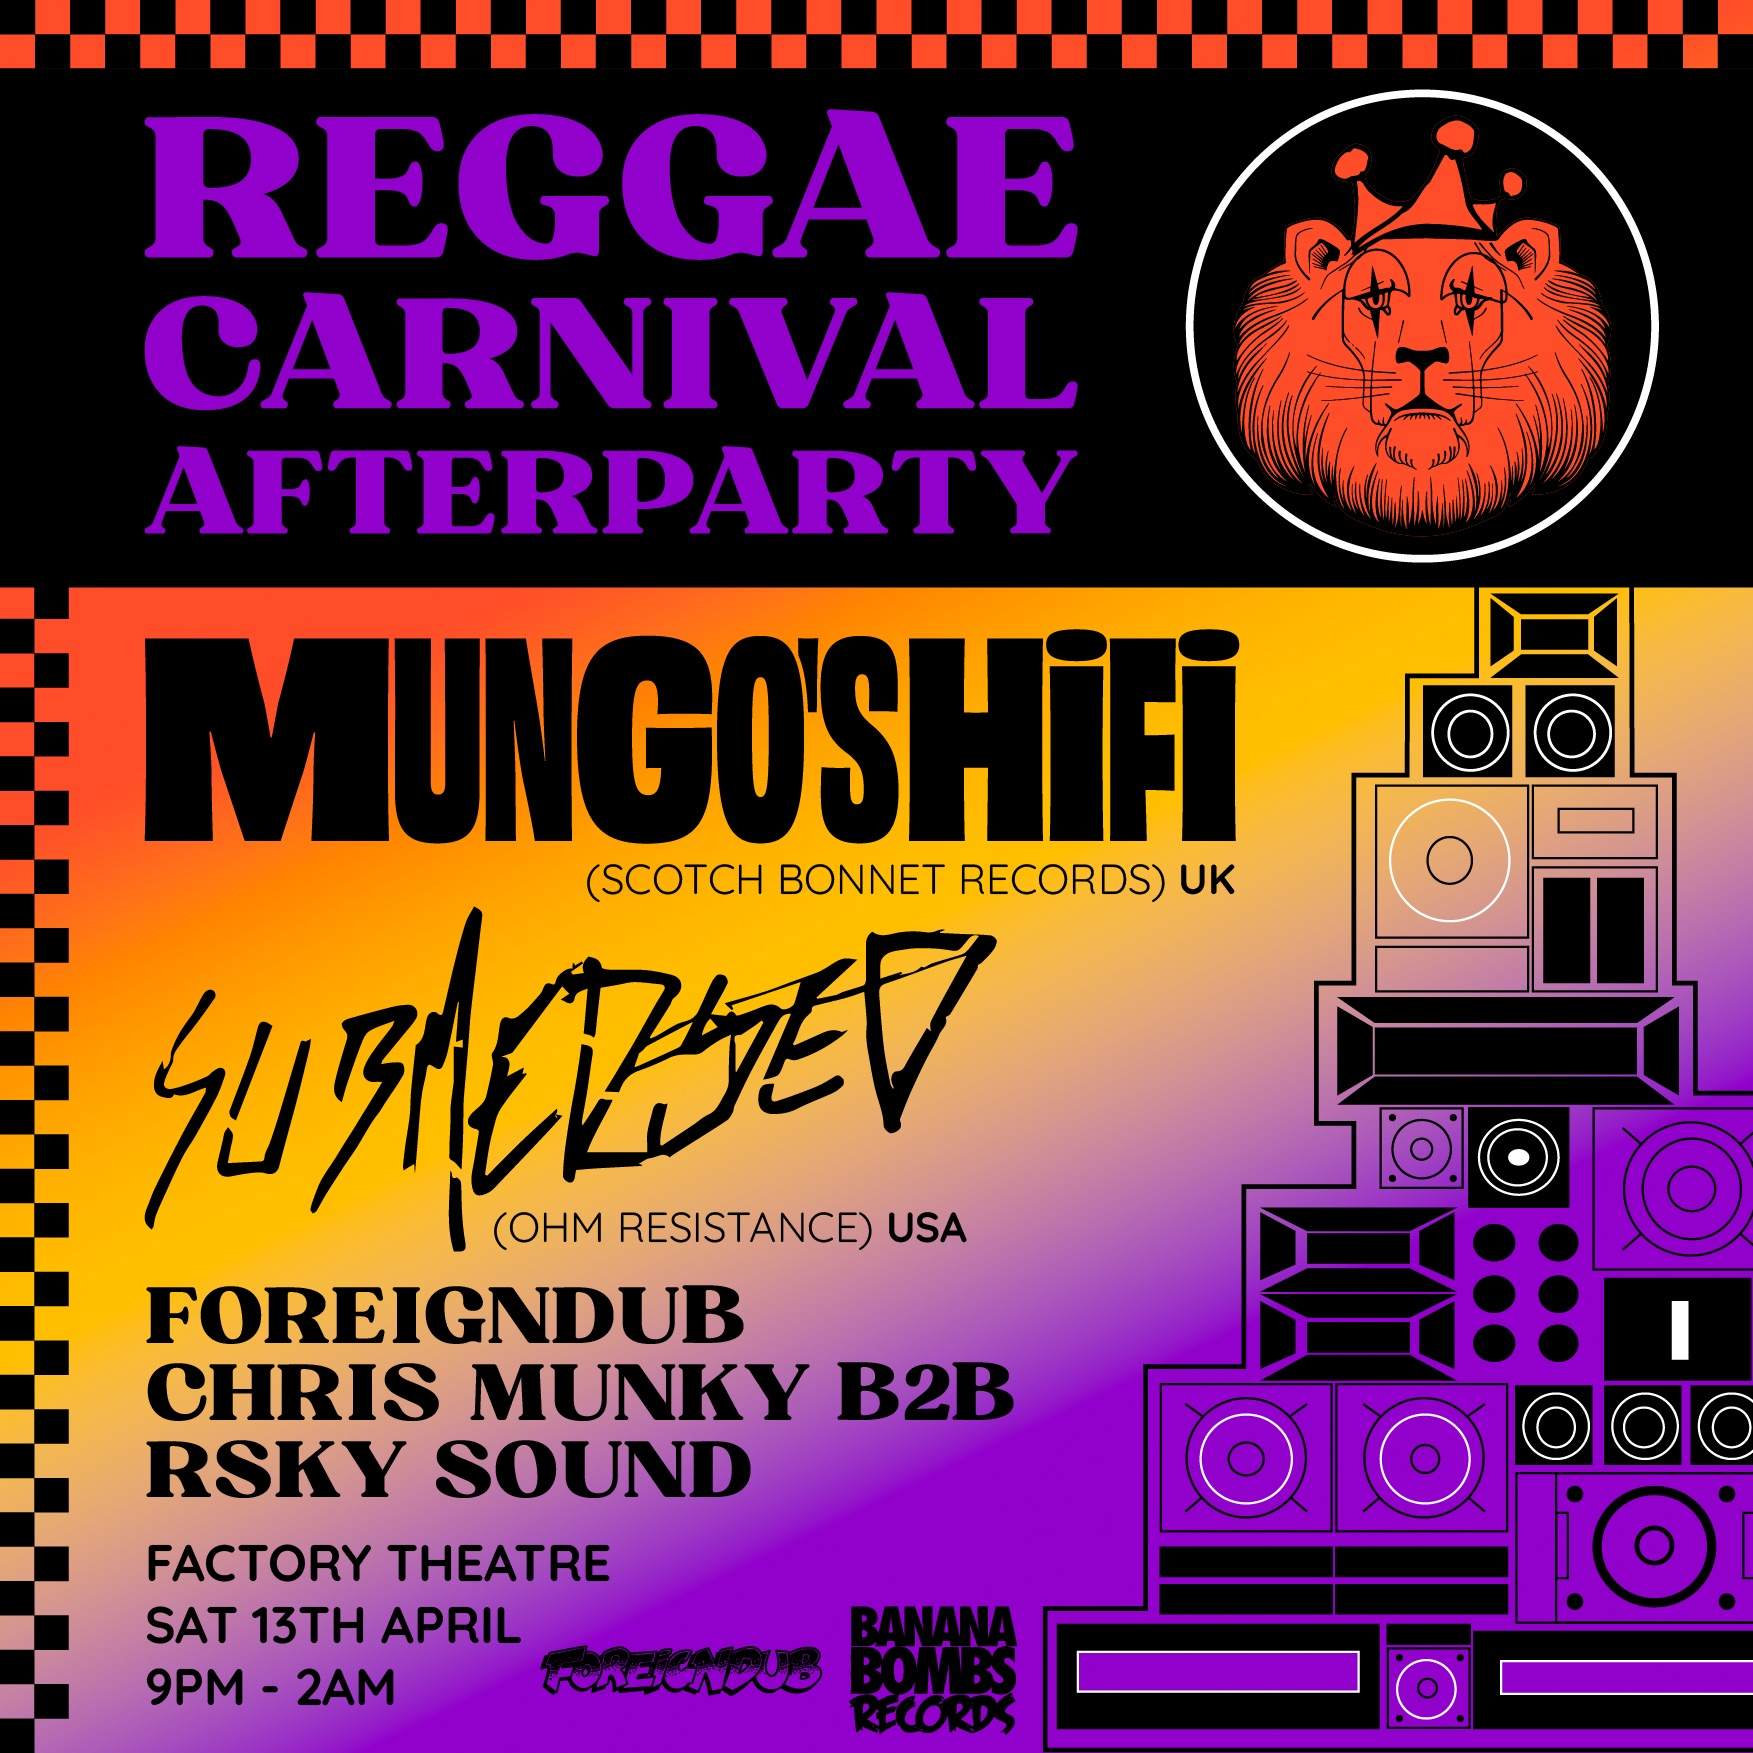 Reggae Carnival Afterparty - フライヤー表